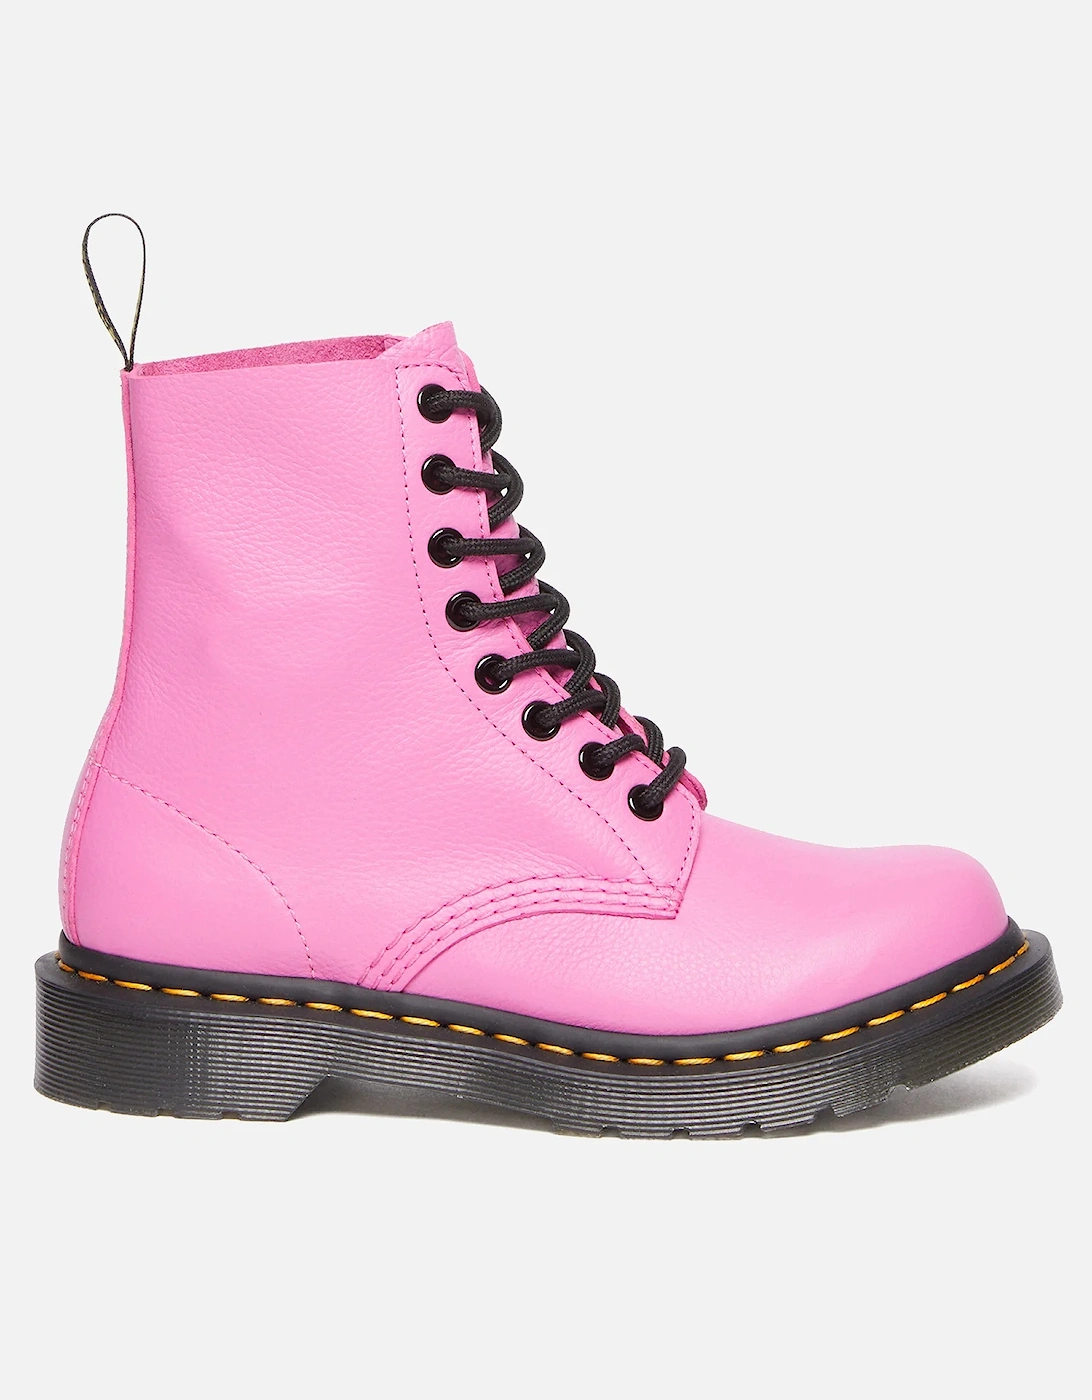 Dr. Martens Women's 1460 Pascal Virginia Leather 8-Eye Boots - Dr. Martens - Home - Dr. Martens Women's 1460 Pascal Virginia Leather 8-Eye Boots, 2 of 1